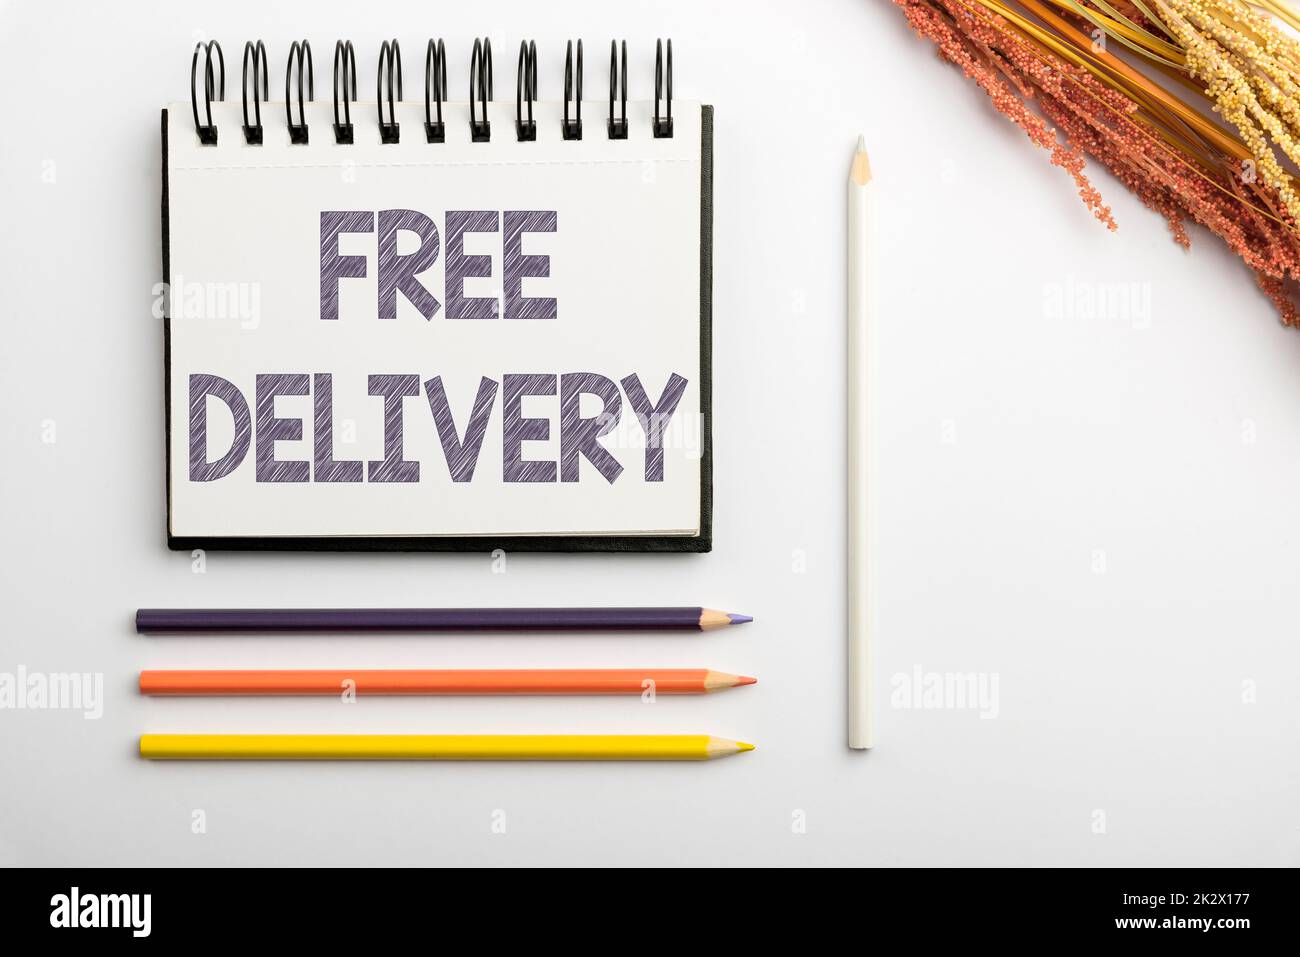 https://c8.alamy.com/comp/2K2X177/text-sign-showing-free-delivery-business-concept-shipping-package-cargo-courier-distribution-center-fragile-flashy-school-office-supplies-teaching-learning-collections-writing-tools-2K2X177.jpg